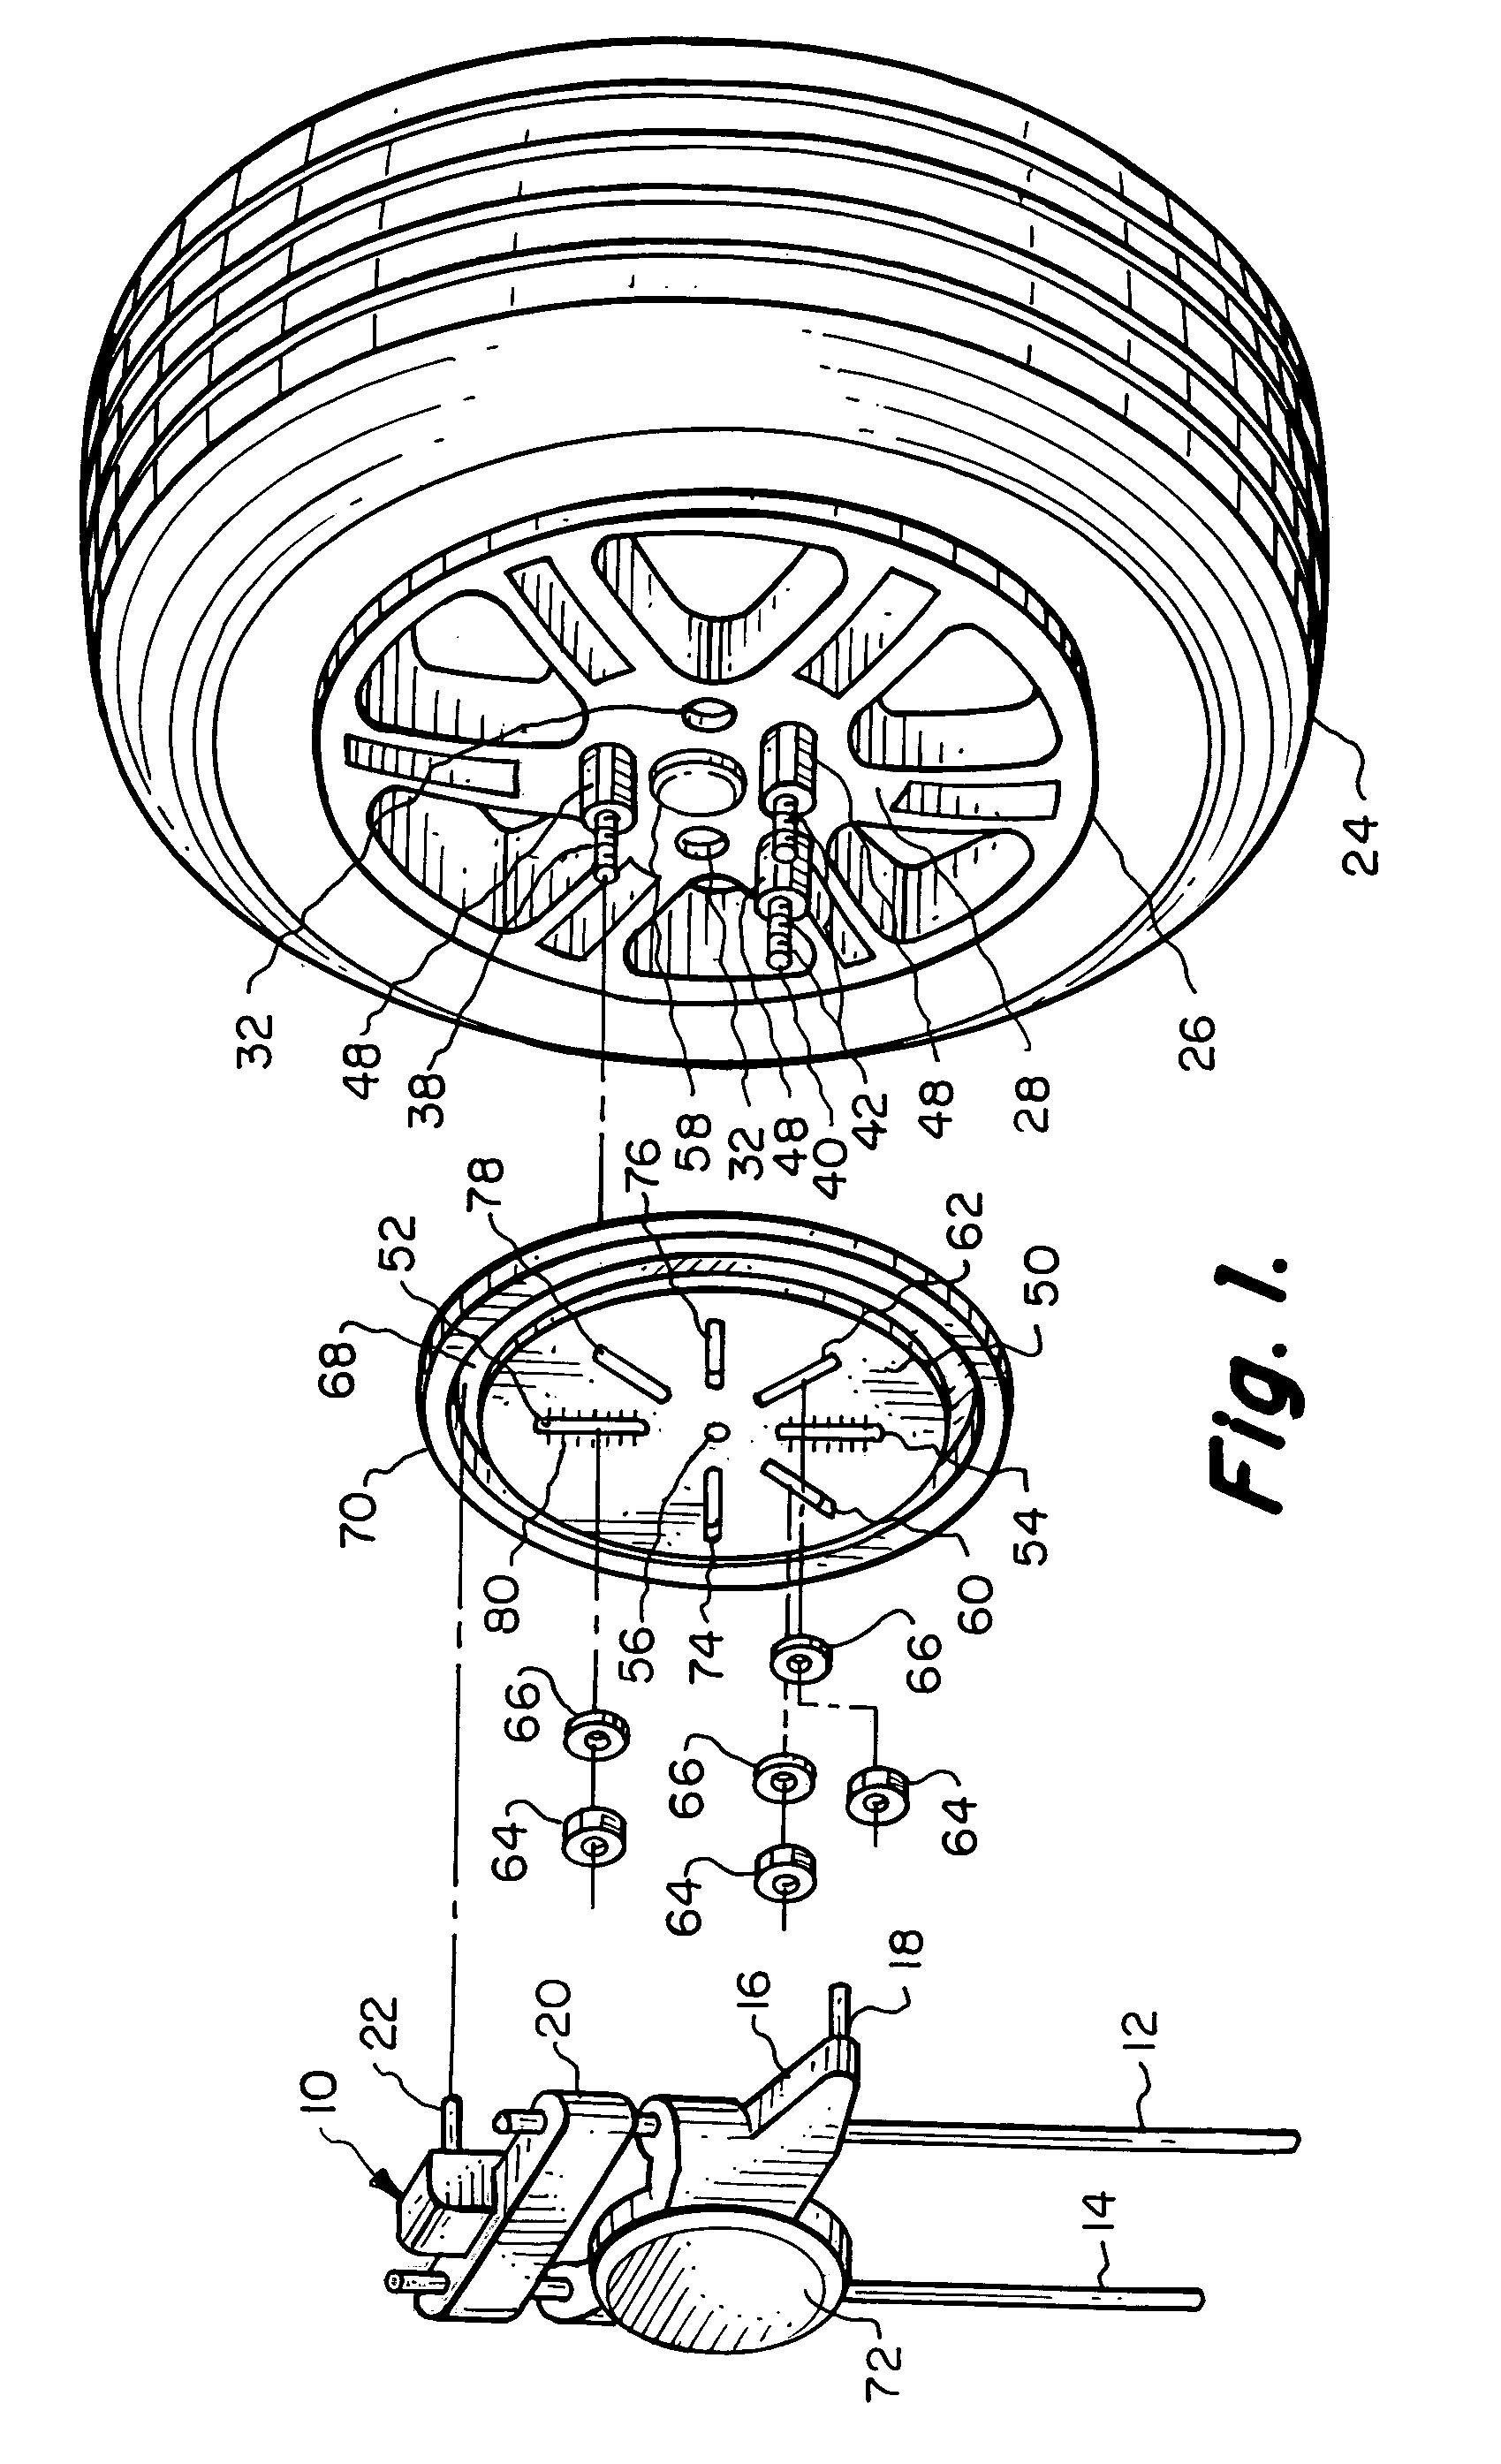 Mounting system for mounting an alignment instrument on a vehicular wheel that uses any known lug bolt pattern